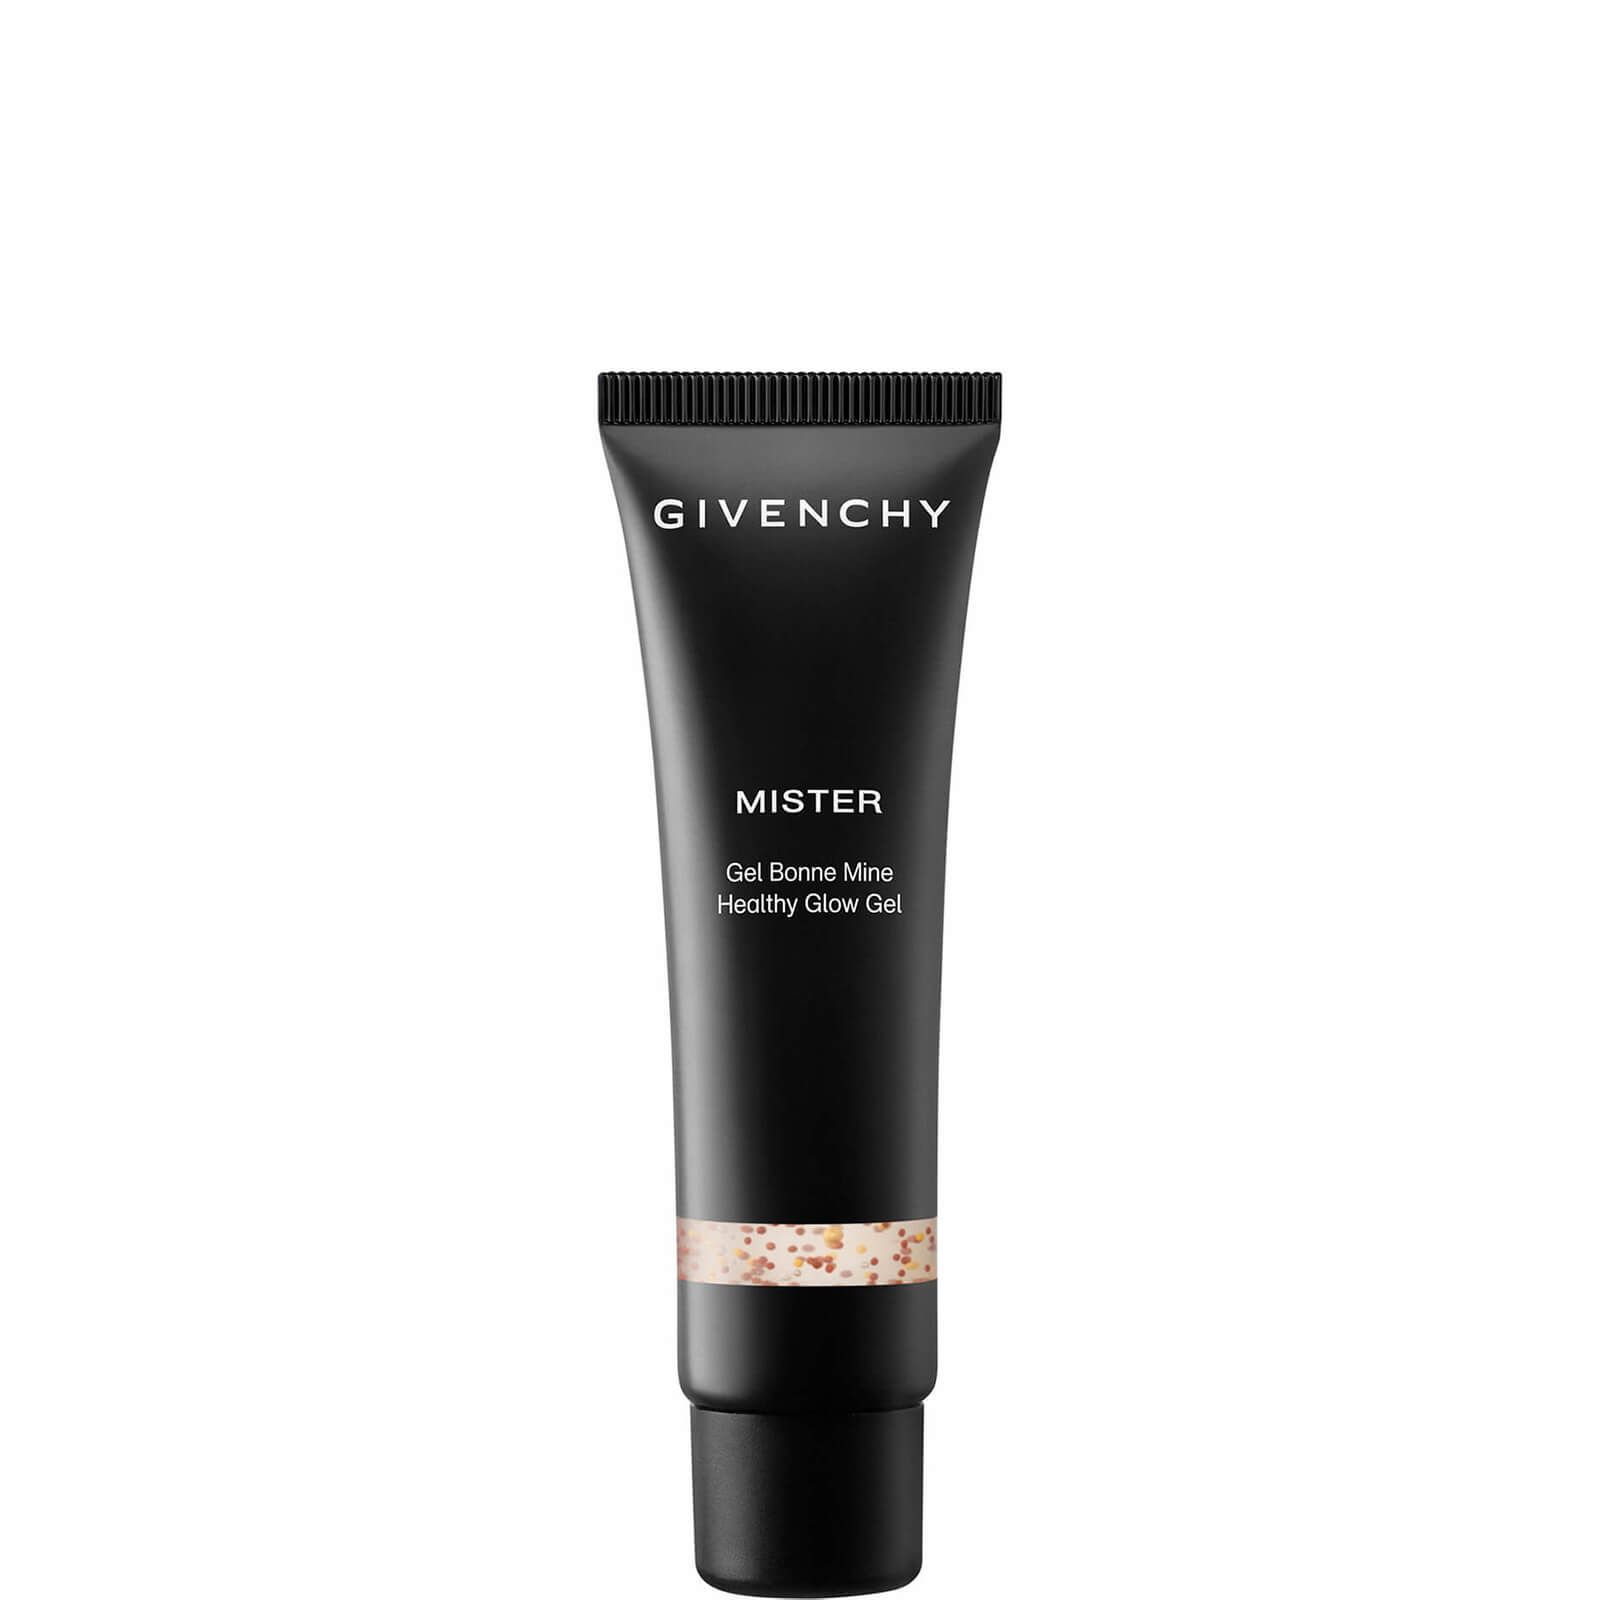 Givenchy Mister Healthy Glow Gel 30ml